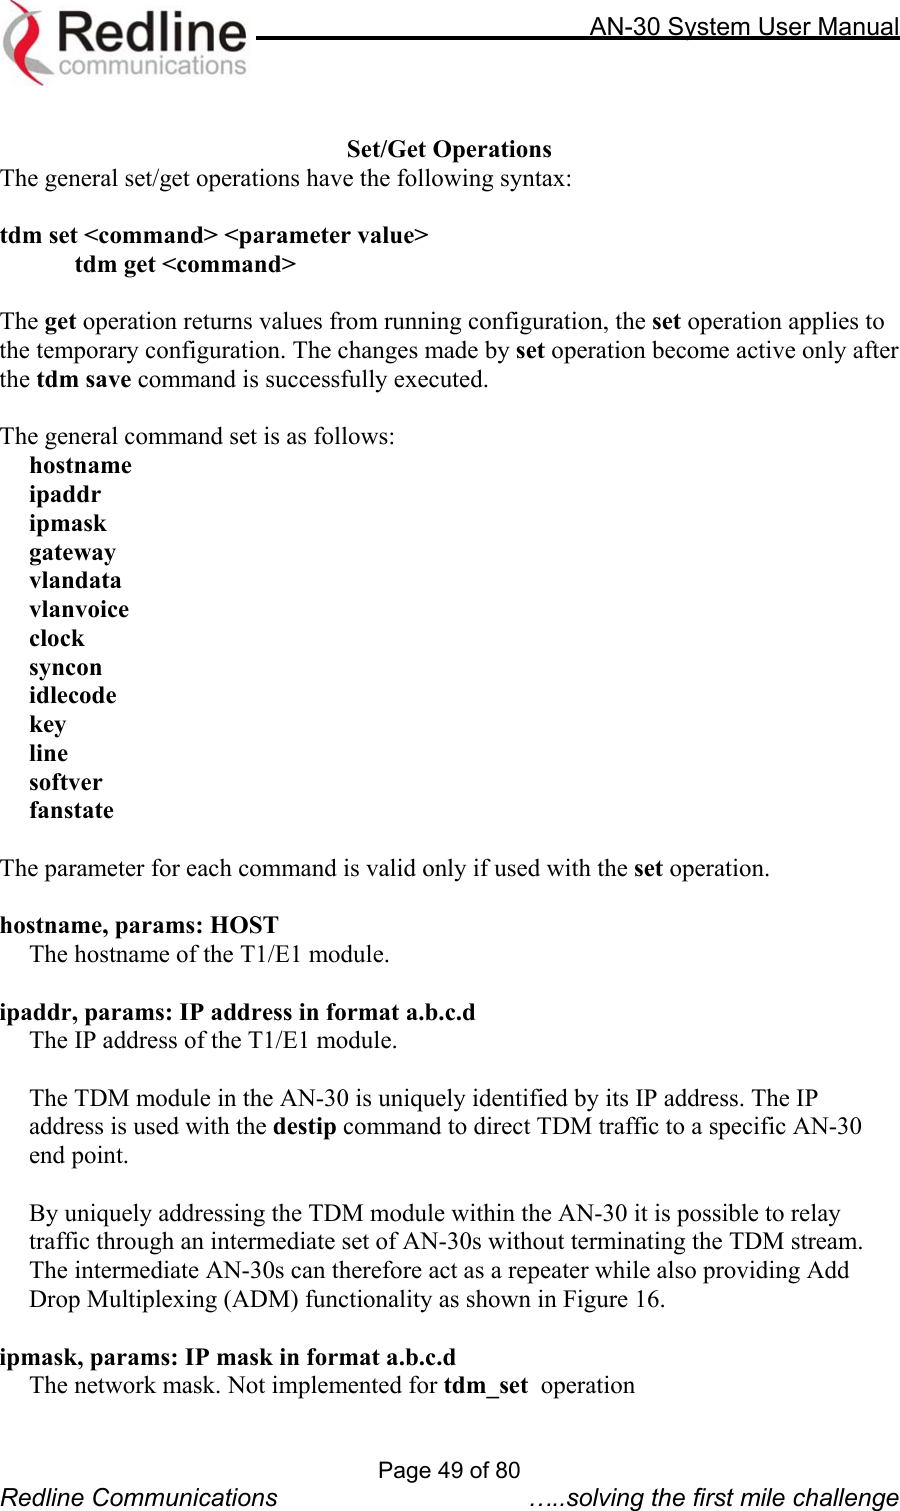     AN-30 System User Manual   Set/Get Operations The general set/get operations have the following syntax:  tdm set &lt;command&gt; &lt;parameter value&gt;   tdm get &lt;command&gt;  The get operation returns values from running configuration, the set operation applies to the temporary configuration. The changes made by set operation become active only after the tdm save command is successfully executed.  The general command set is as follows:  hostname ipaddr ipmask gateway vlandata vlanvoice clock syncon idlecode key line softver fanstate  The parameter for each command is valid only if used with the set operation.  hostname, params: HOST   The hostname of the T1/E1 module.   ipaddr, params: IP address in format a.b.c.d The IP address of the T1/E1 module.  The TDM module in the AN-30 is uniquely identified by its IP address. The IP address is used with the destip command to direct TDM traffic to a specific AN-30 end point.   By uniquely addressing the TDM module within the AN-30 it is possible to relay traffic through an intermediate set of AN-30s without terminating the TDM stream. The intermediate AN-30s can therefore act as a repeater while also providing Add Drop Multiplexing (ADM) functionality as shown in Figure 16.    ipmask, params: IP mask in format a.b.c.d   The network mask. Not implemented for tdm_set  operation  Page 49 of 80 Redline Communications  …..solving the first mile challenge 